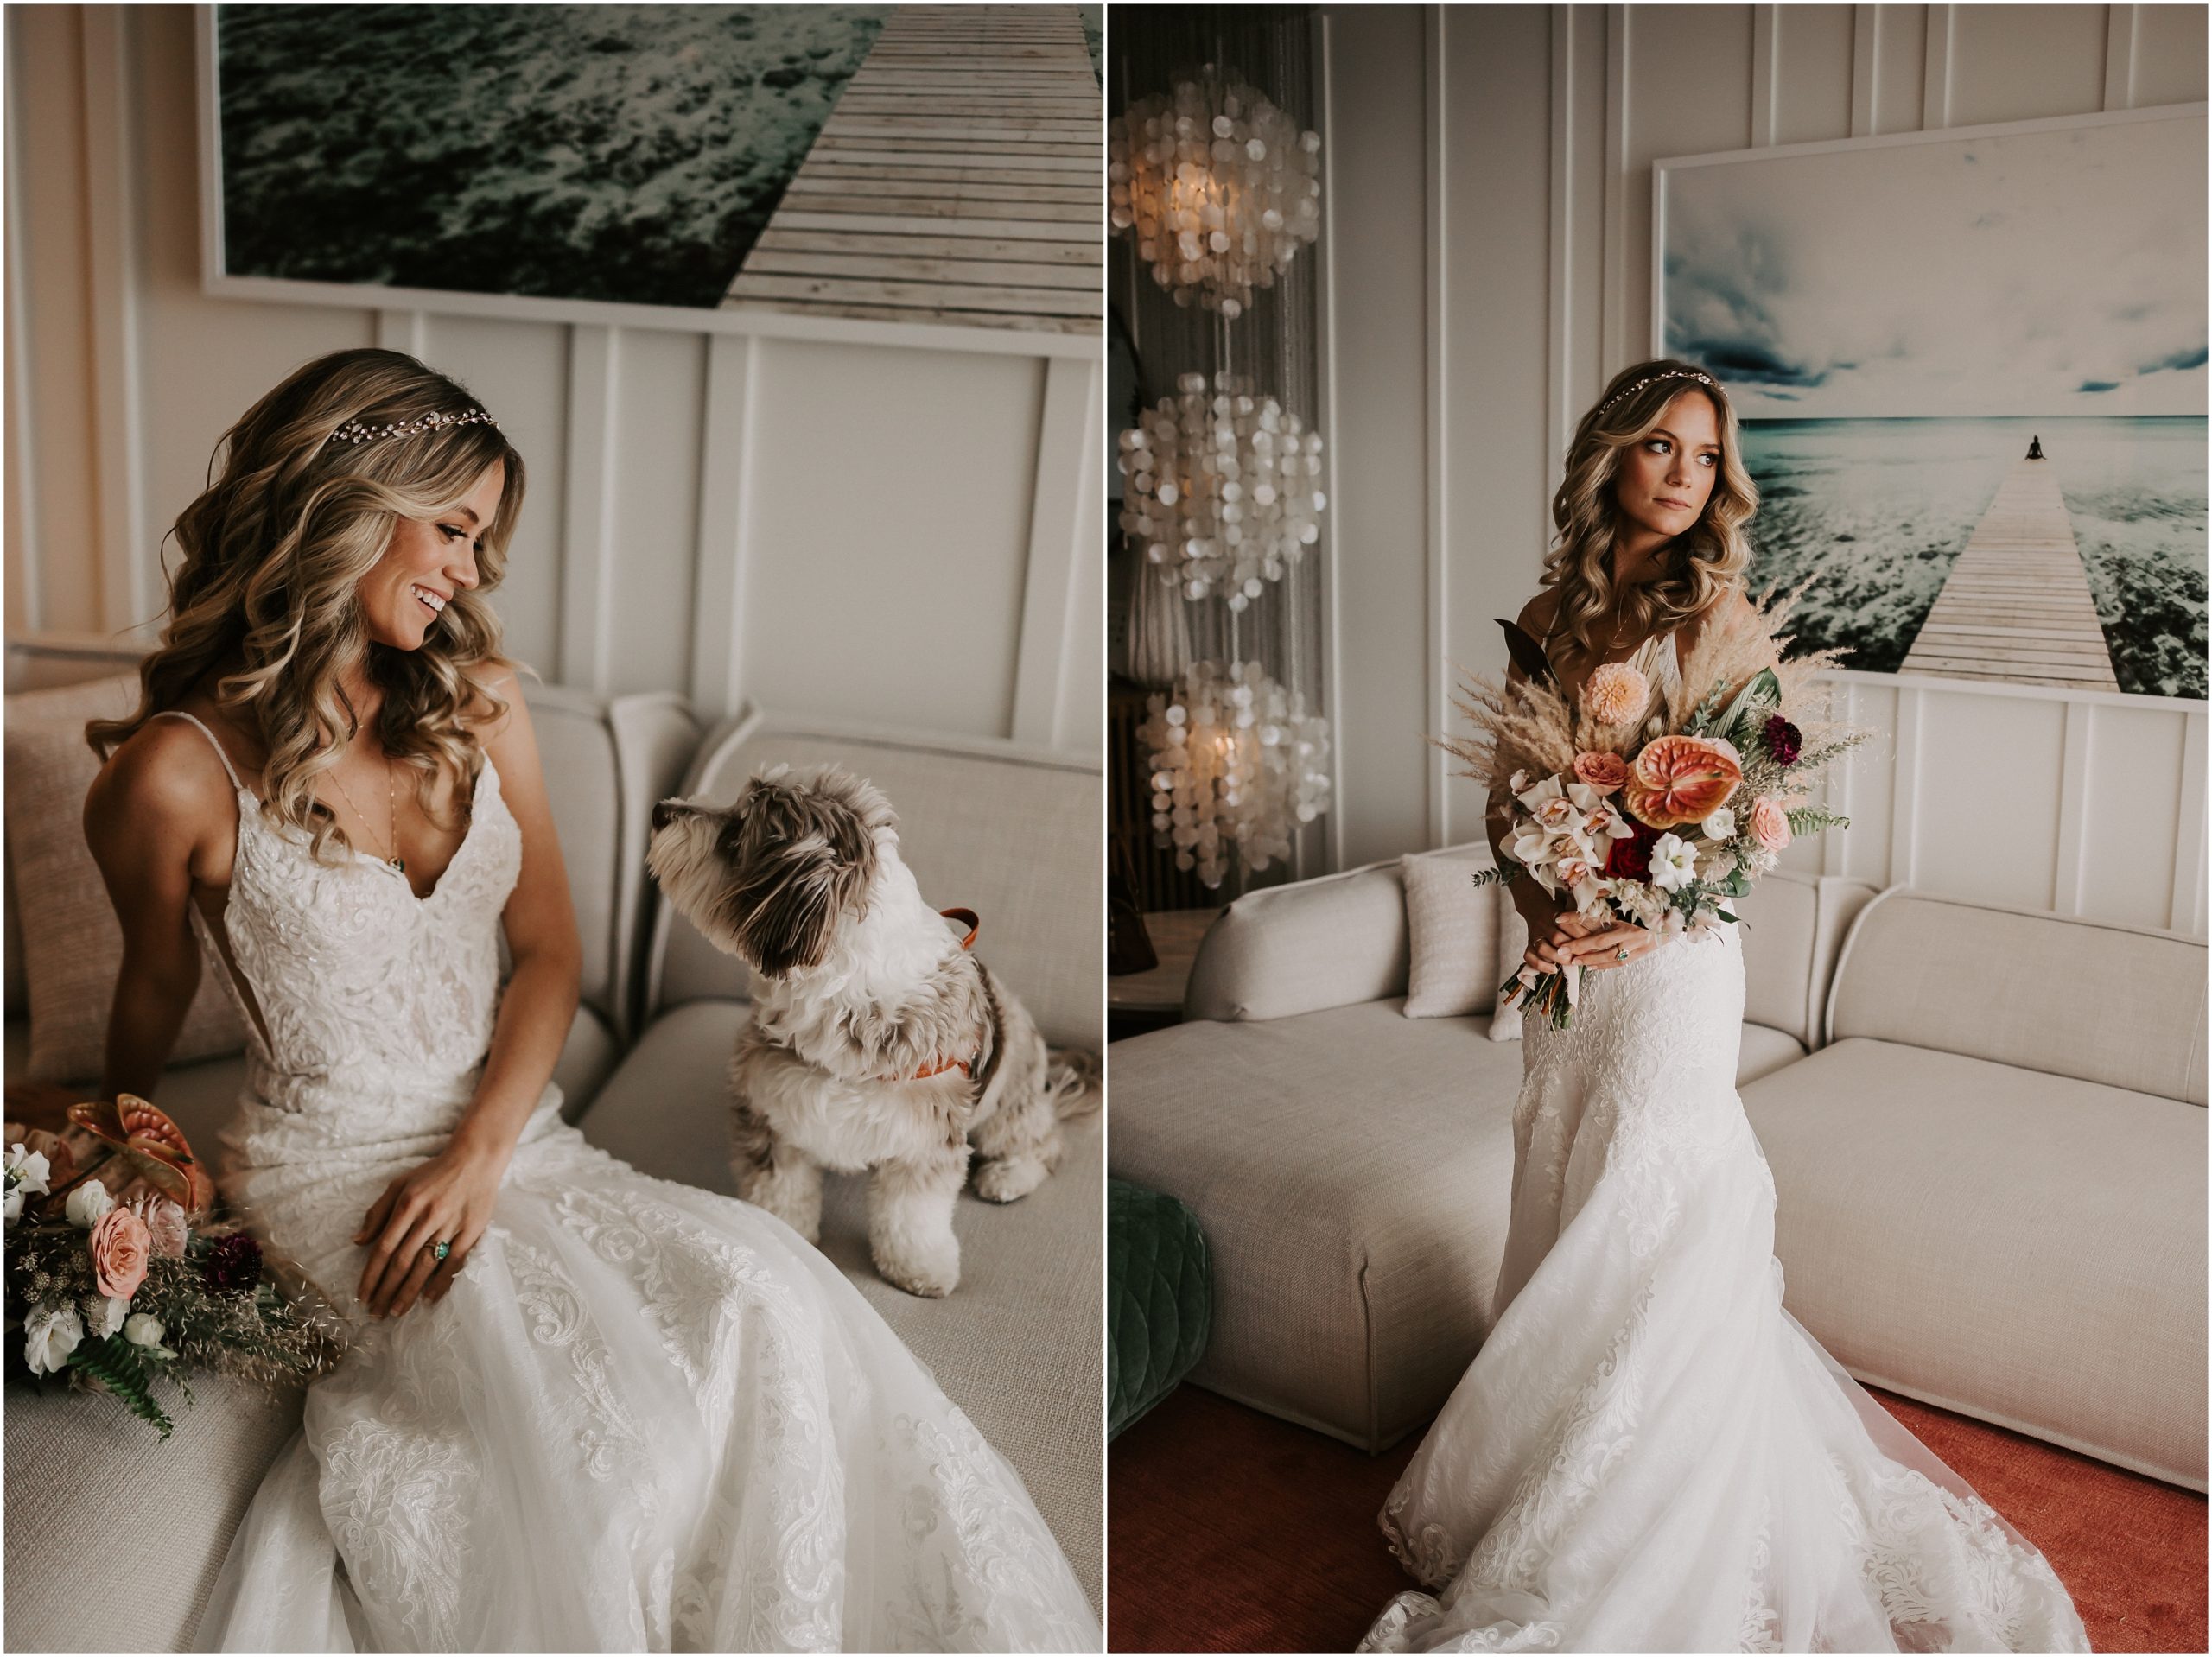 She chose not having a bridal party which resulted in more free time during the day. She was able to take it all in during her getting ready time with a special guest, their lil Paddy boy and a photograph commemorating sweet Tegan, who sadly passed a few weeks before their wedding.